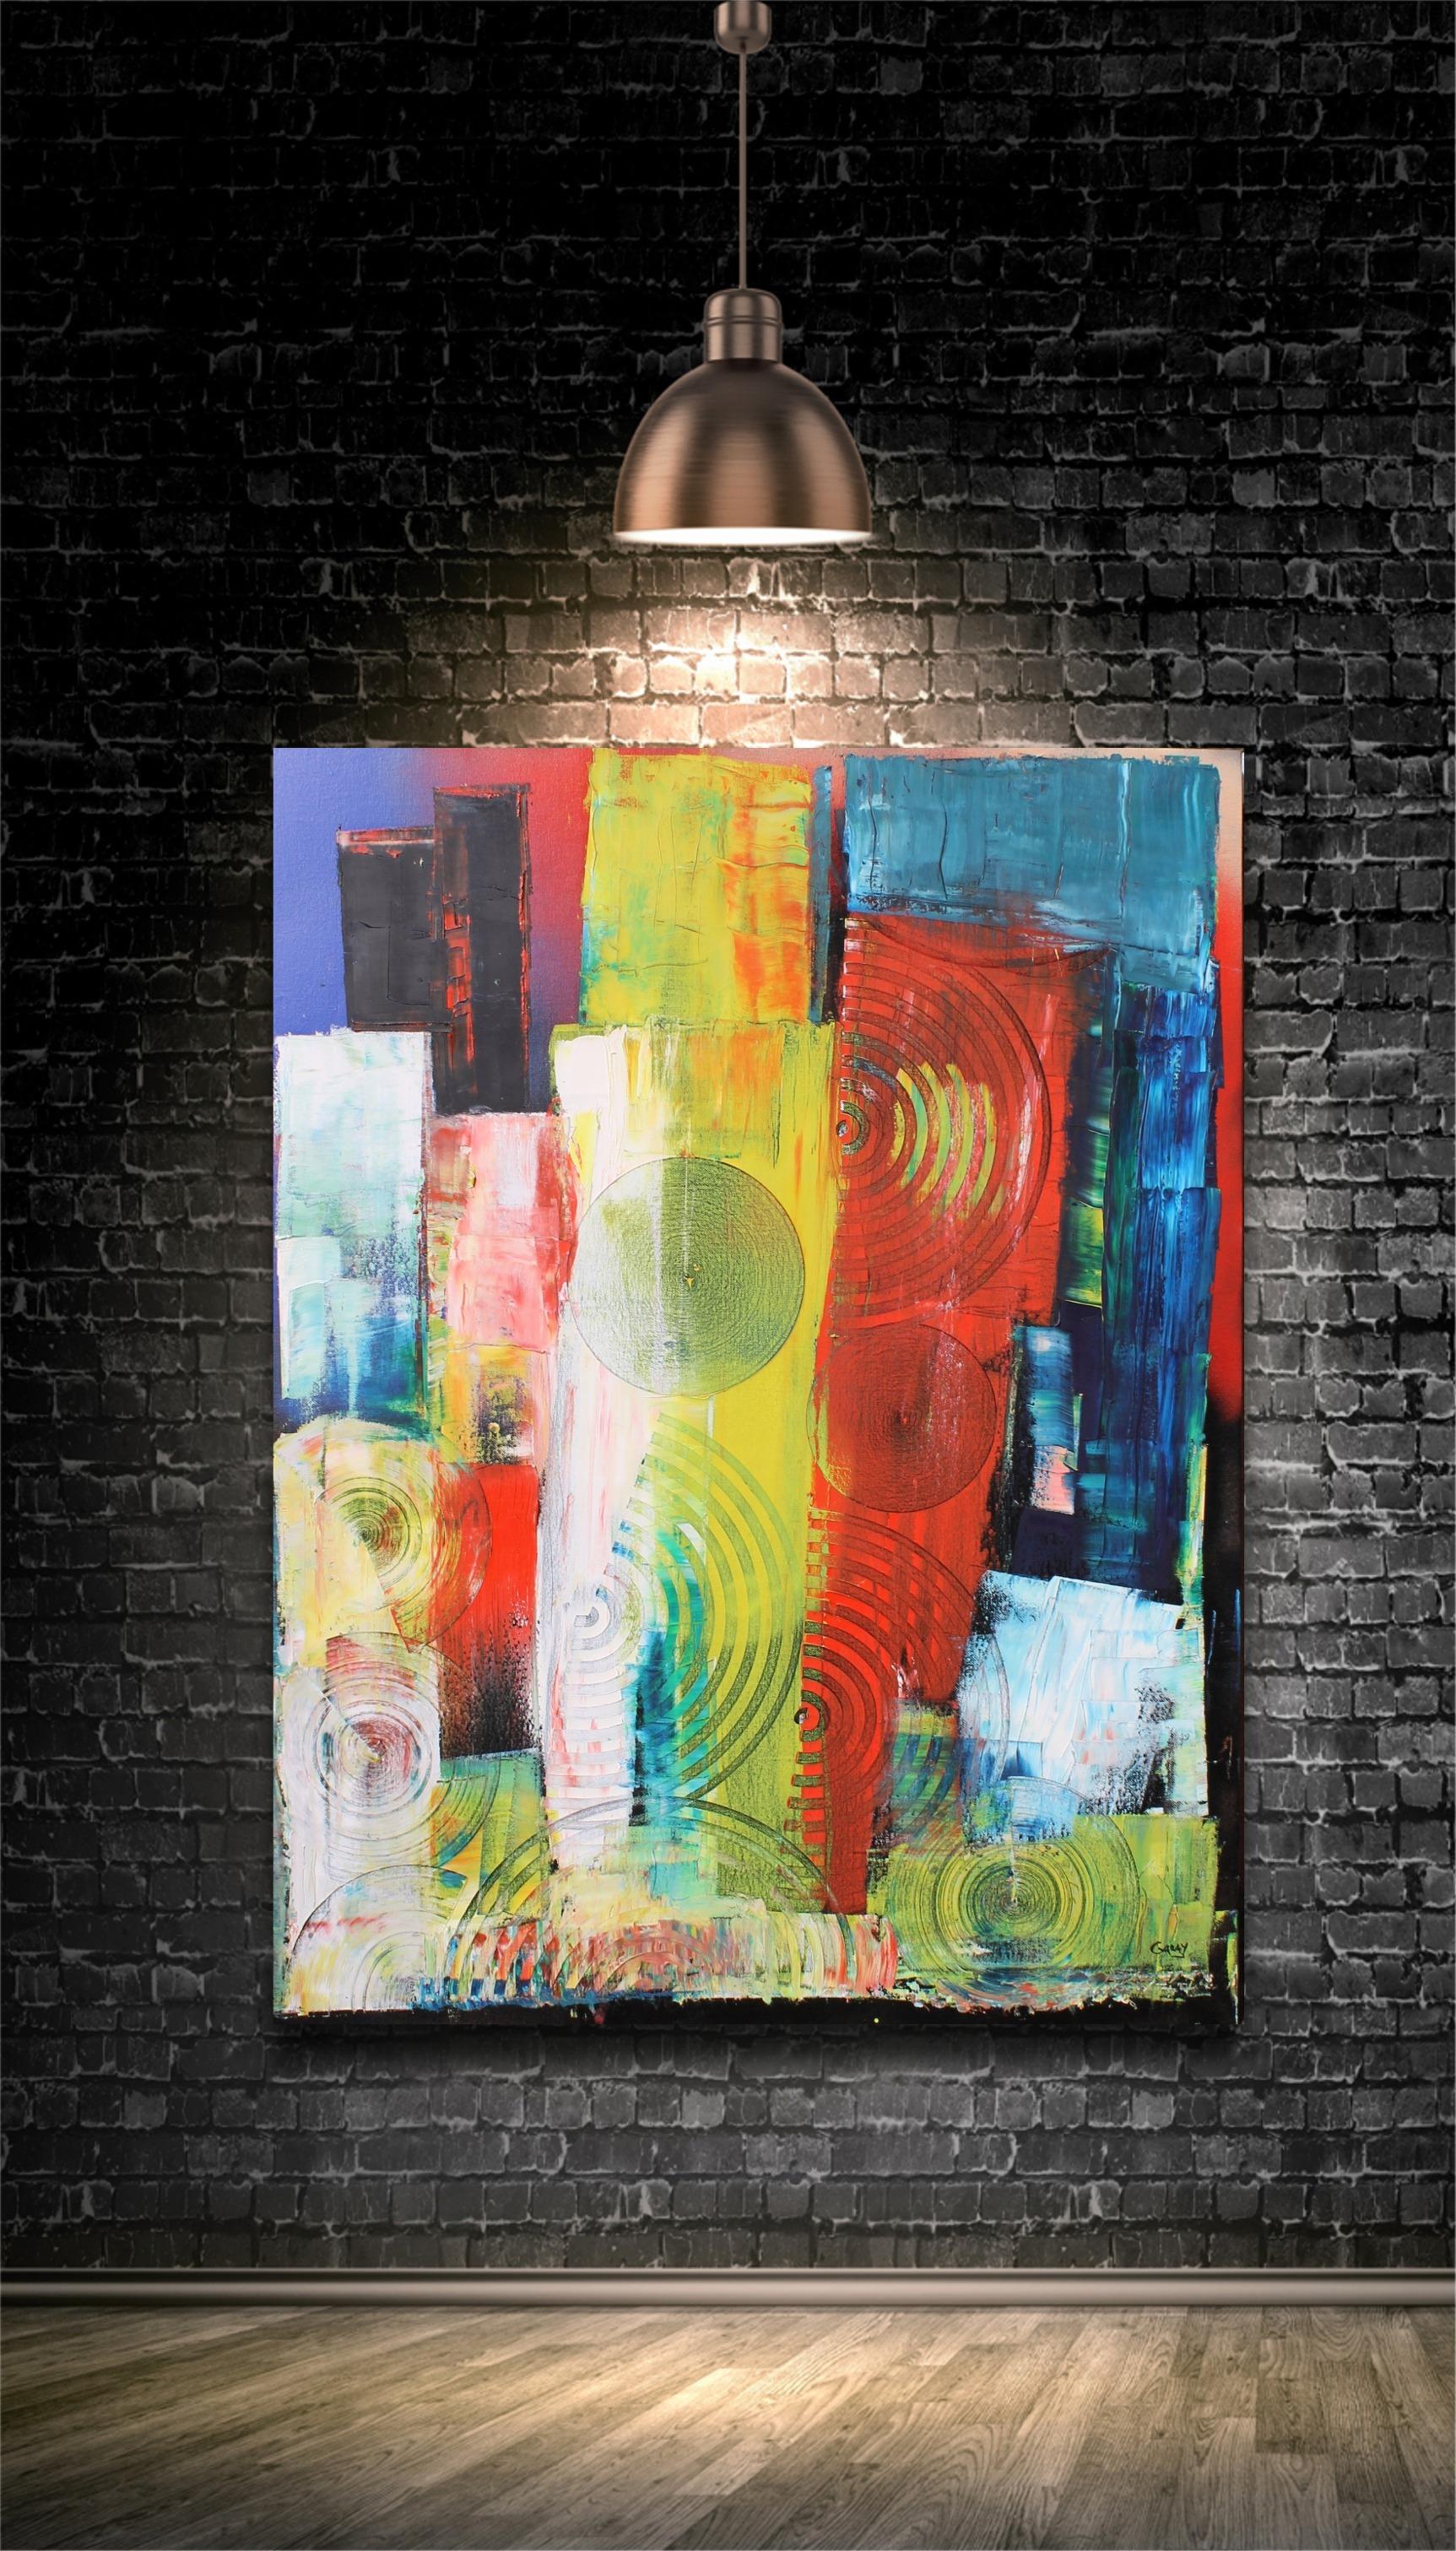 New York - Abstract Expressionist Painting by Juan Jose Garay